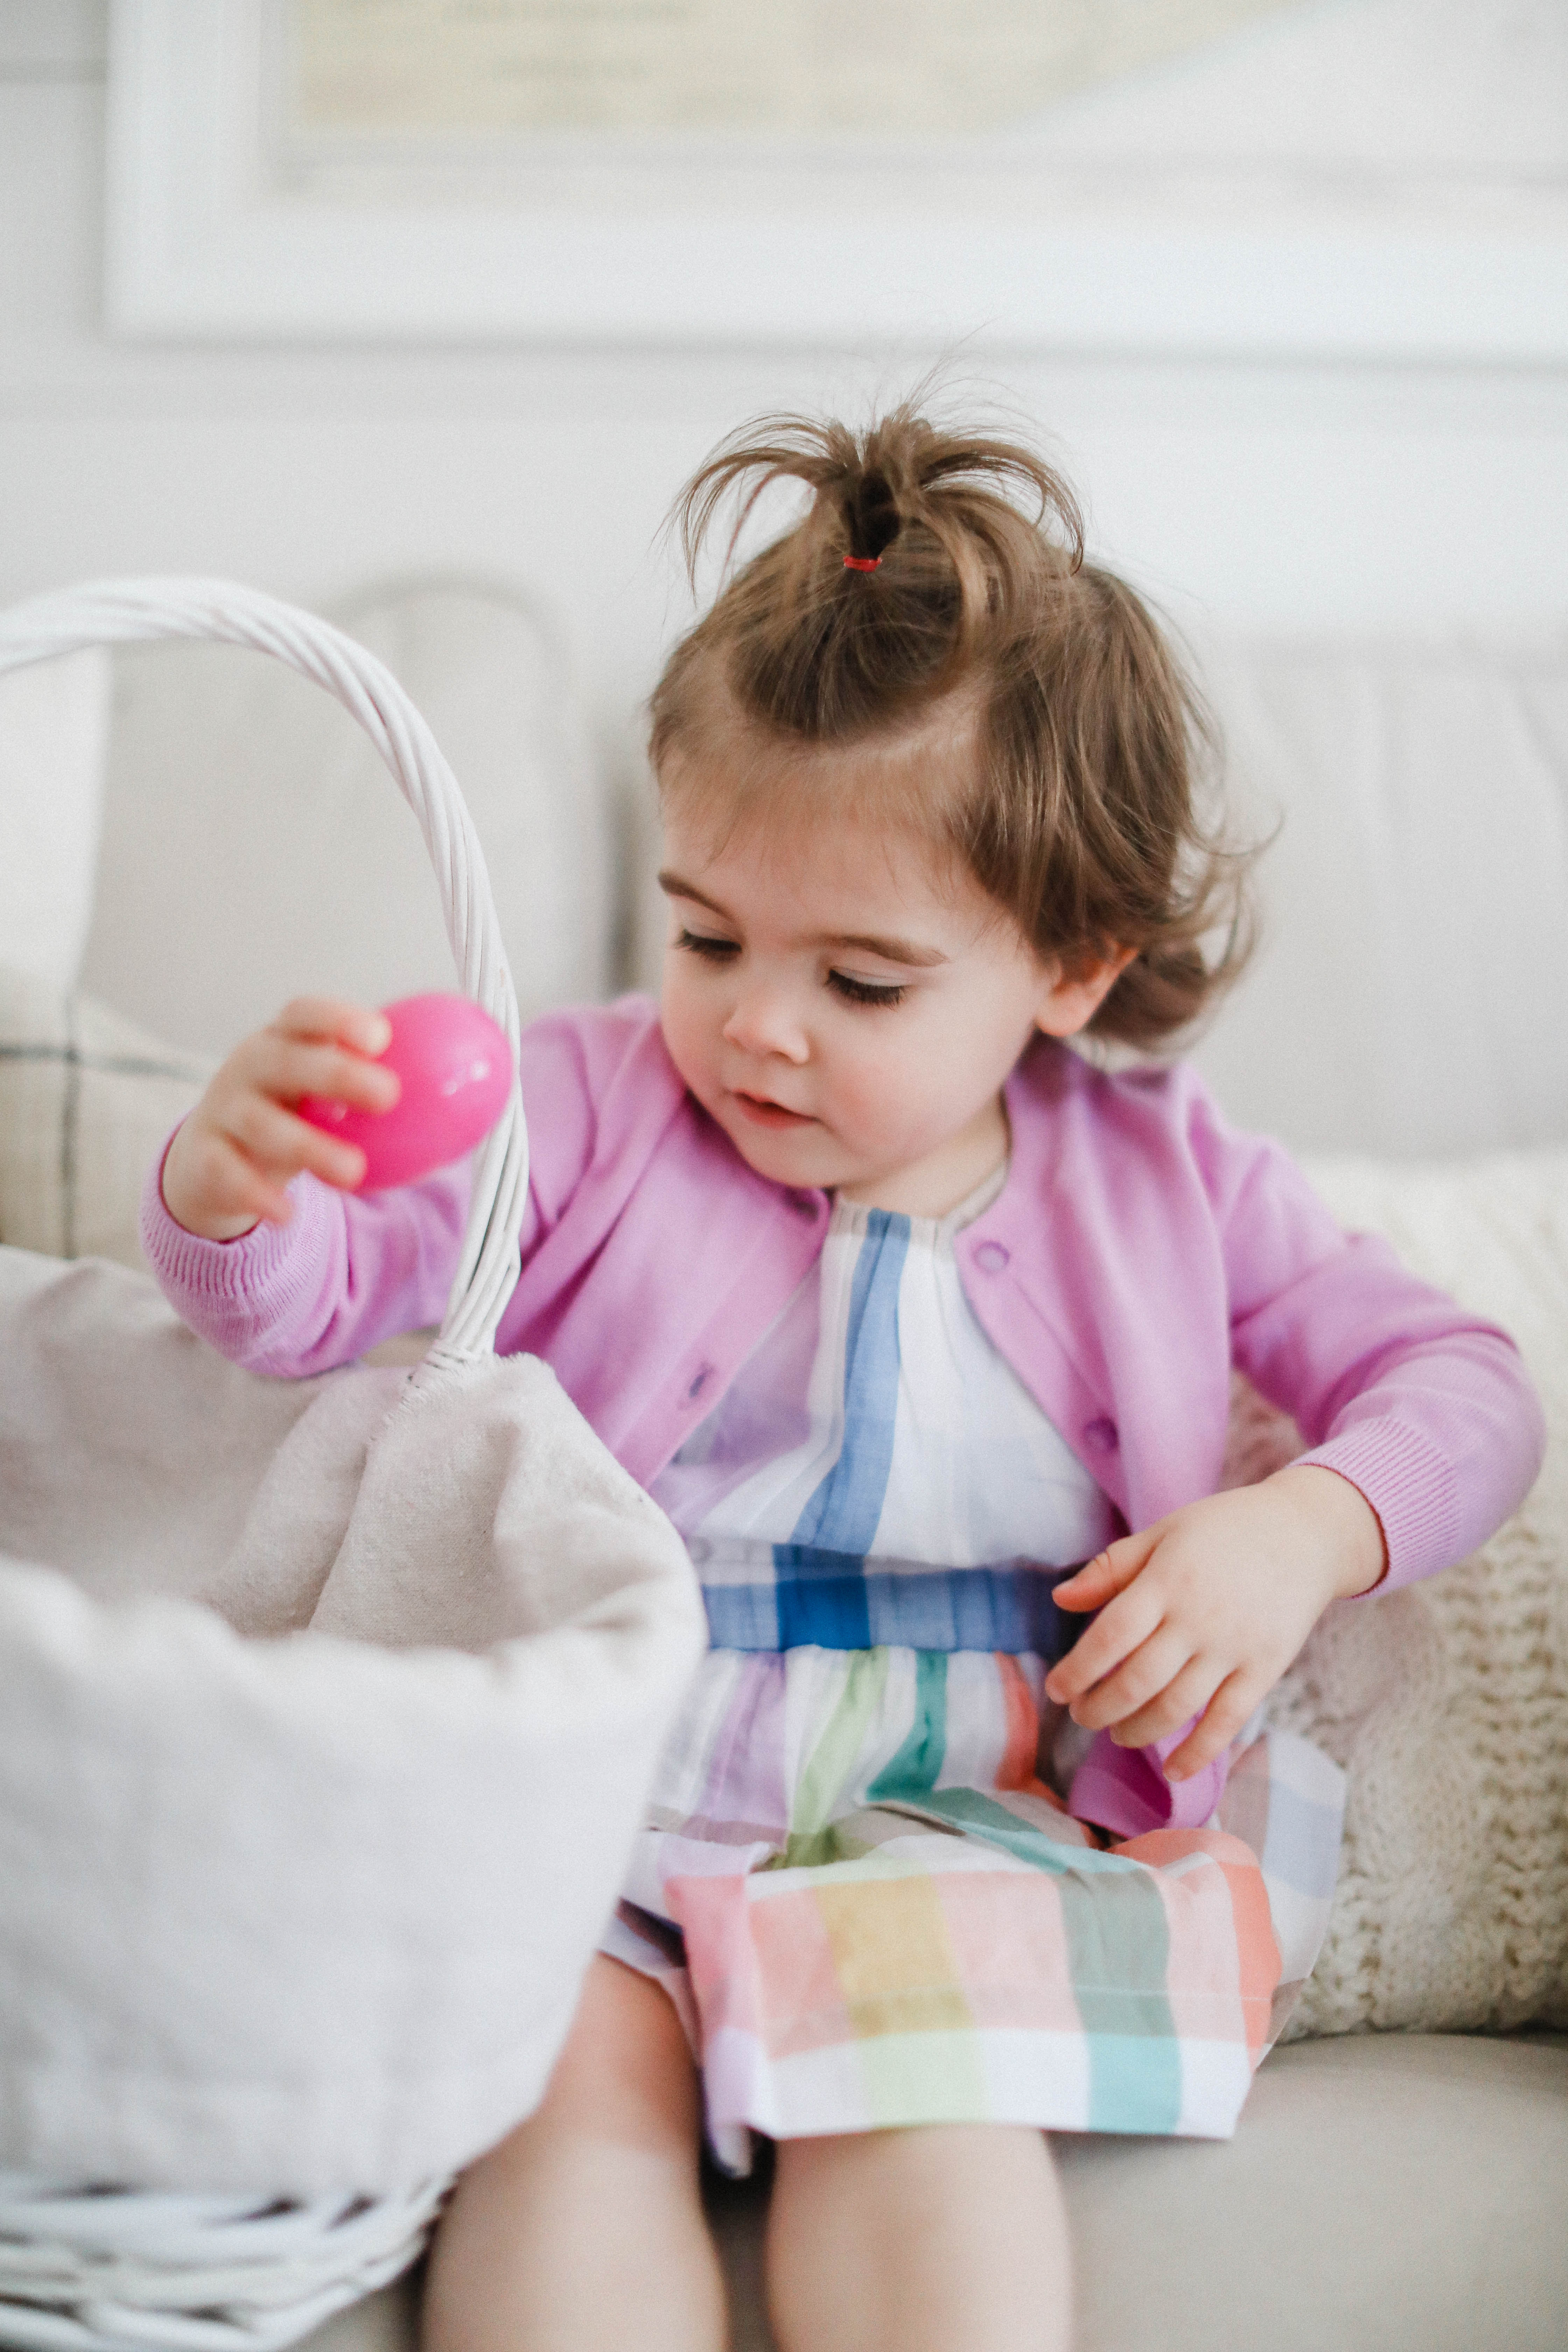 Life and style blogger Lauren McBride shares Family Easter Outfit Ideas that are color coordinated and cheerful for the holiday.